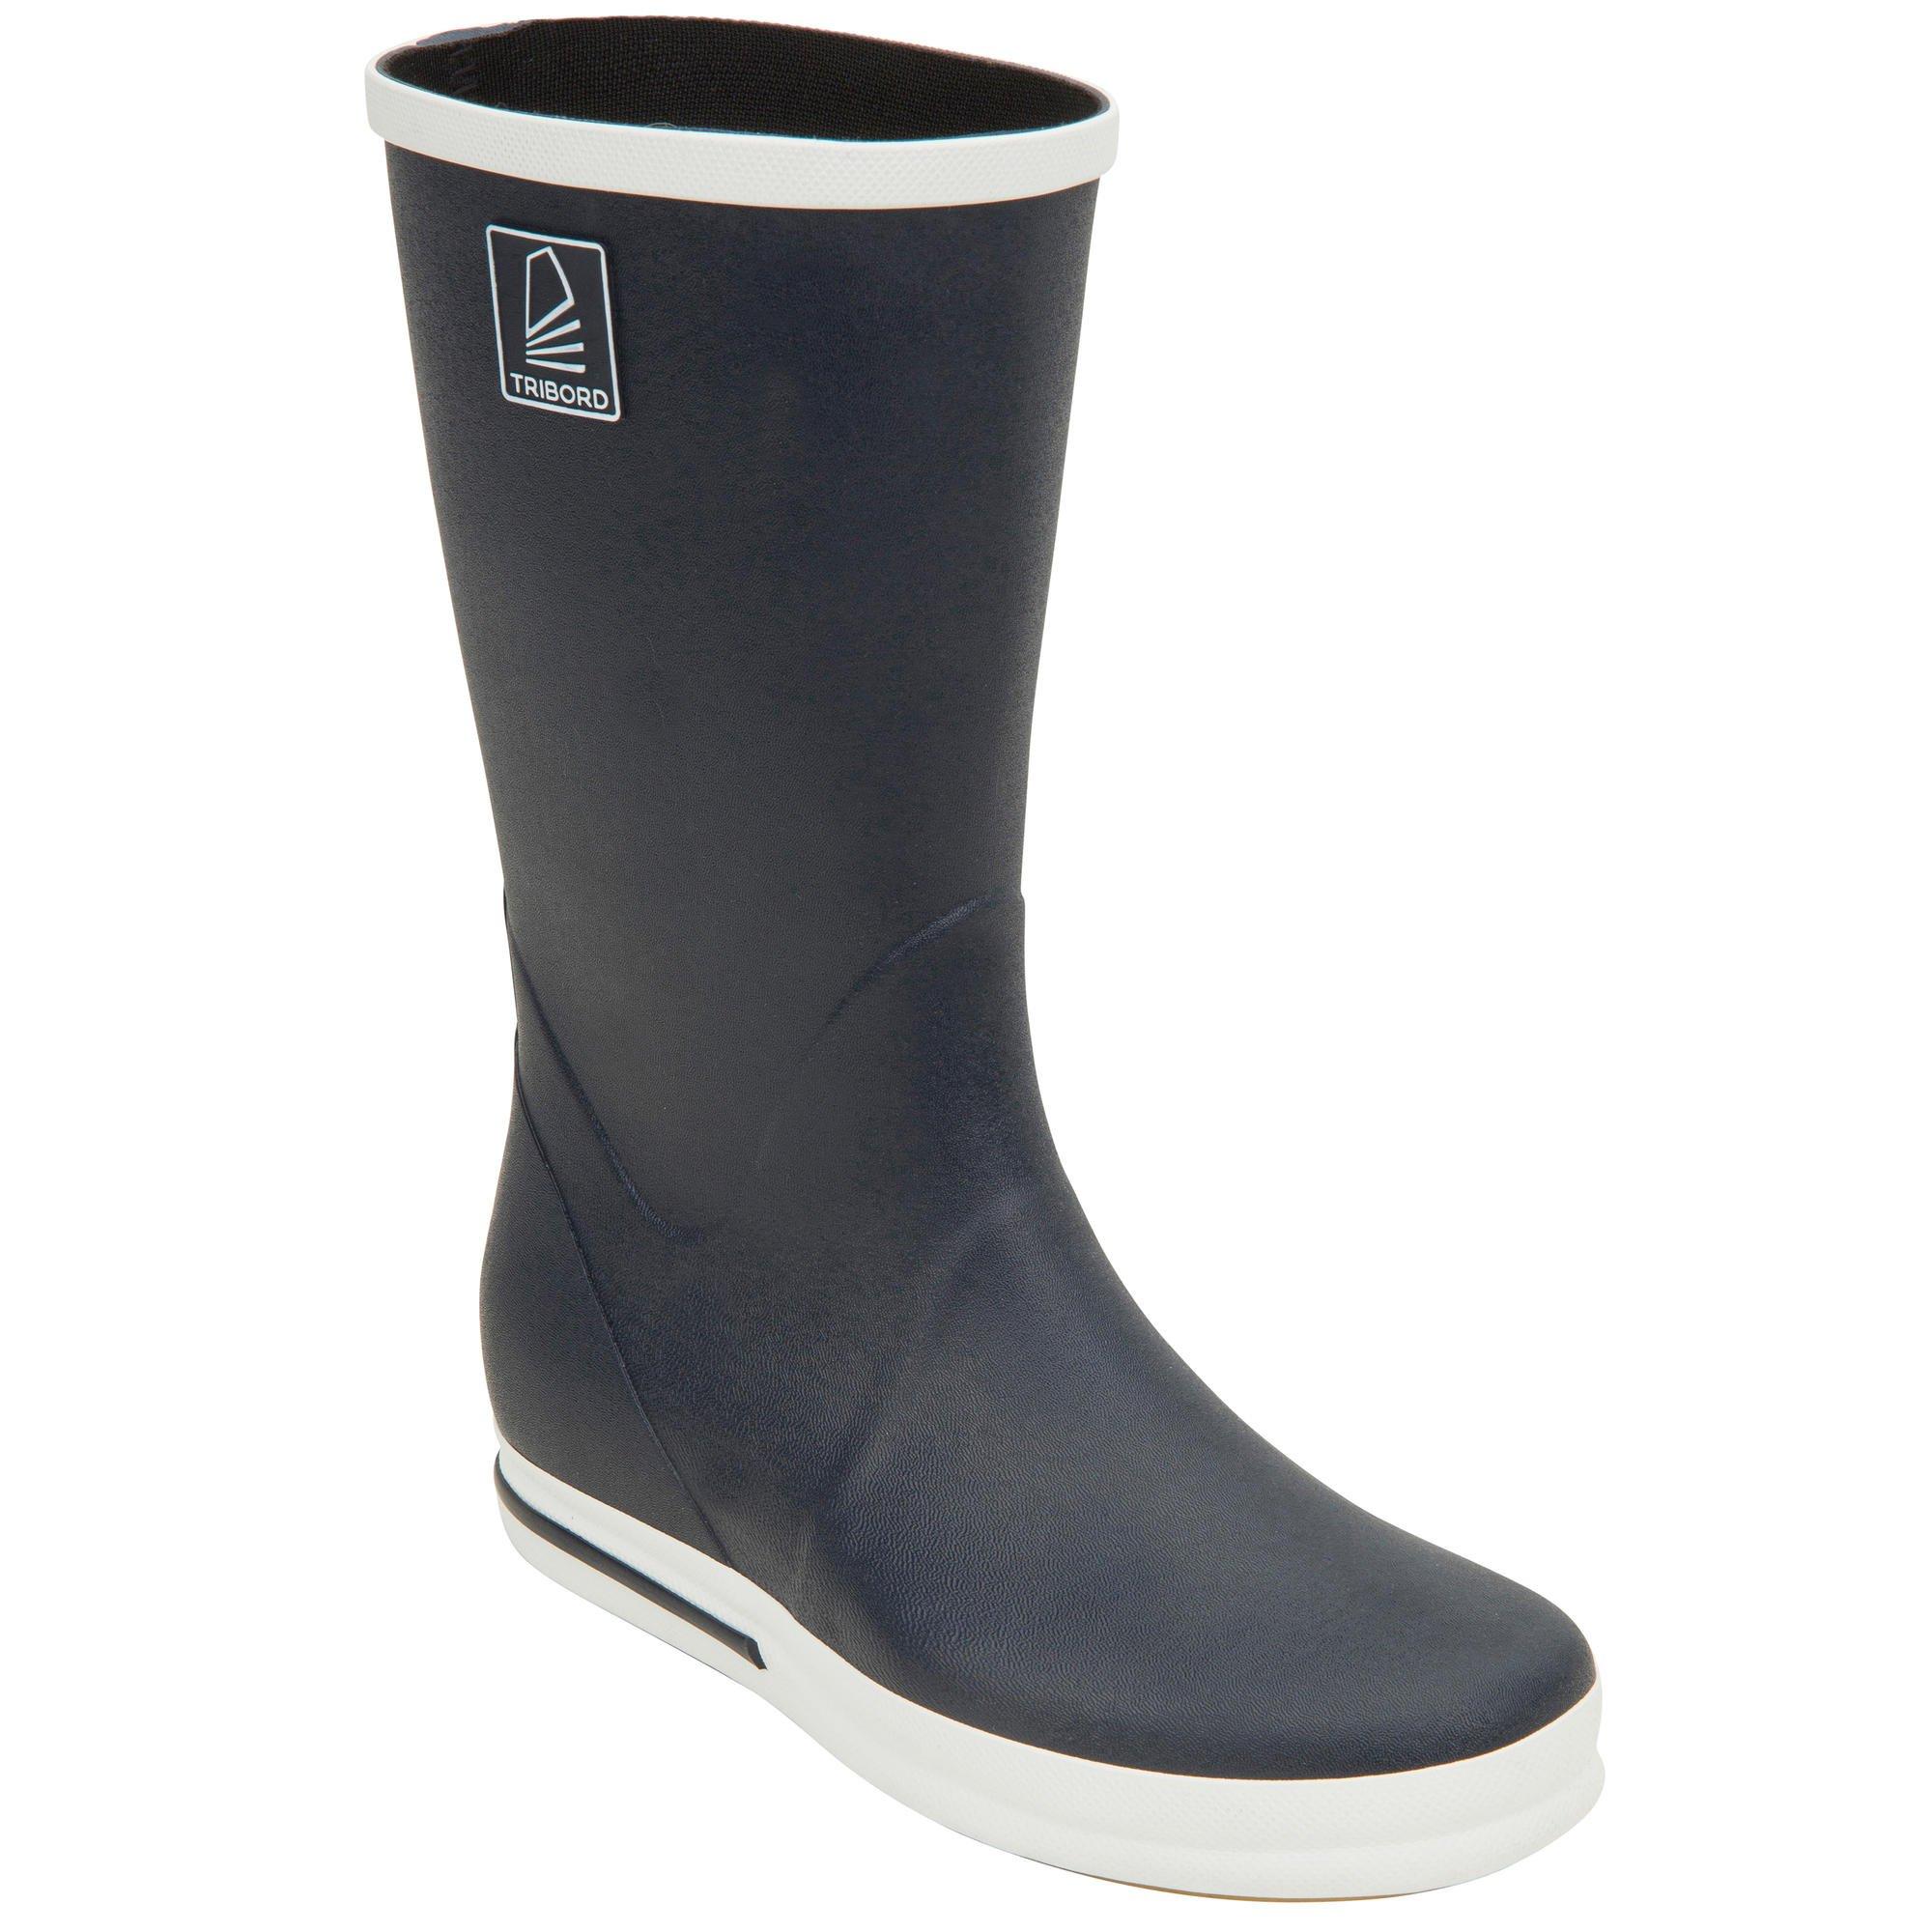 Boots | Decathlon Adult Sailing Wellie Boots 500 | Tribord